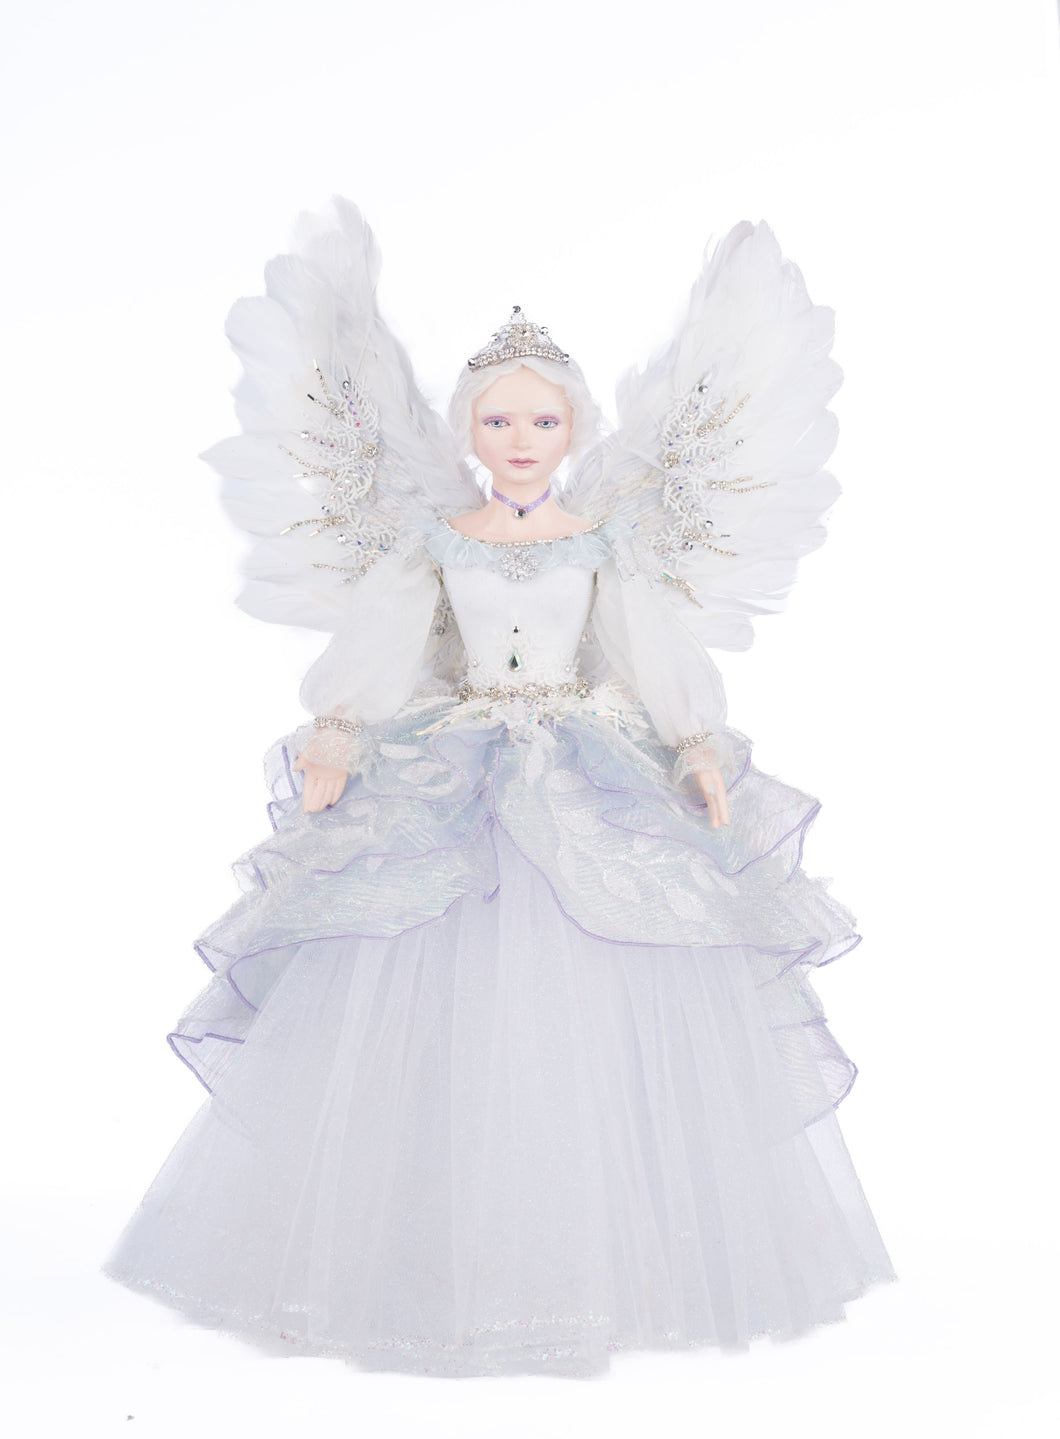 Katherine's Collection Crystalline Angel Tree Topper